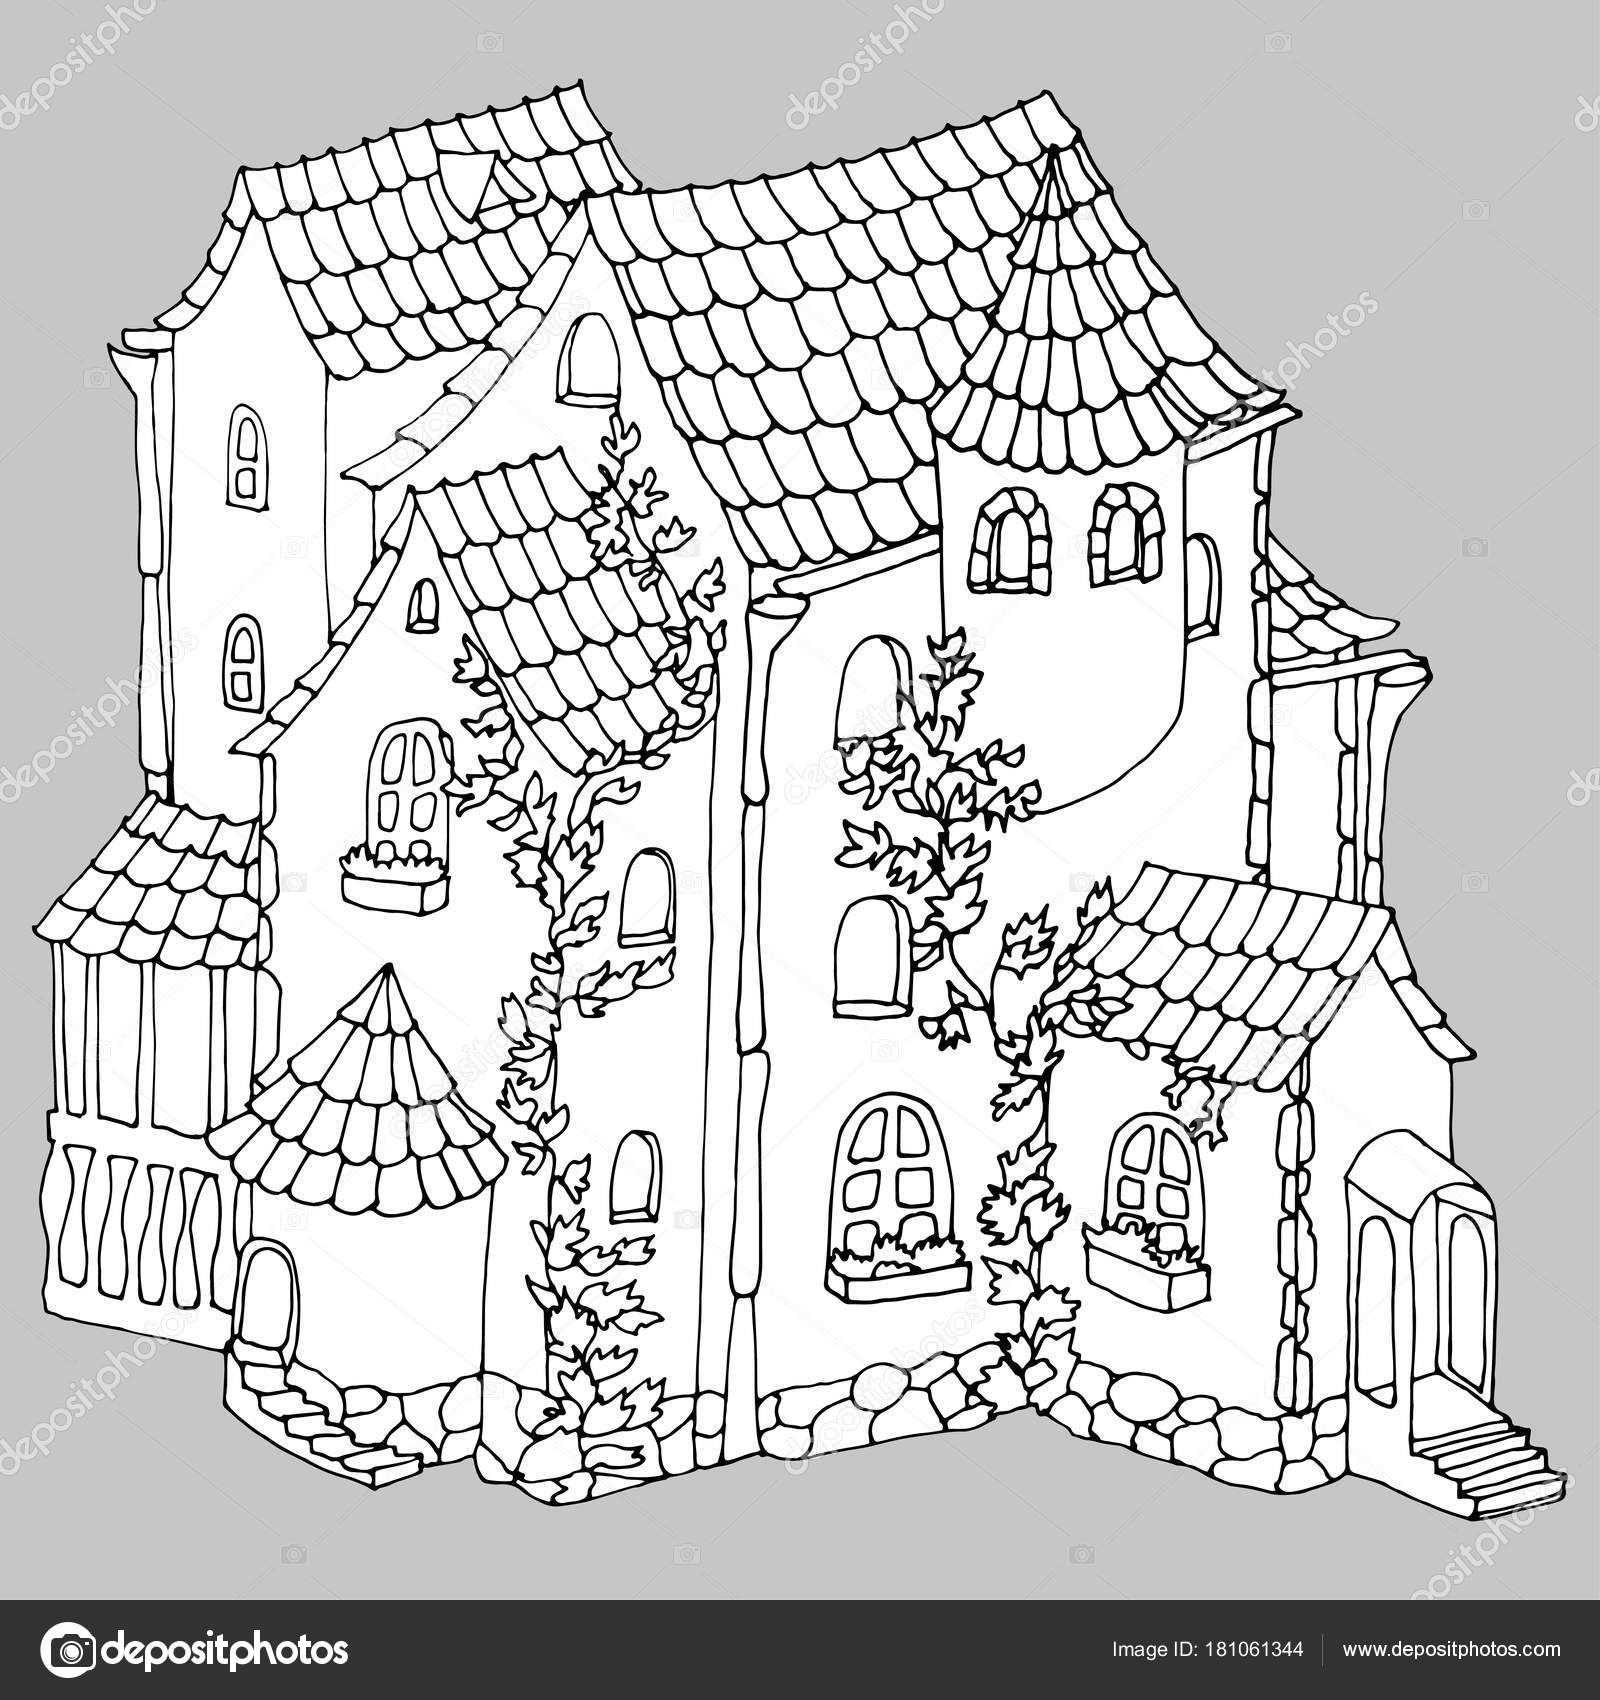 Mansion Coloring Pages Fairy Tale Ancient Brick House Mansion Graphic Vector Illustration